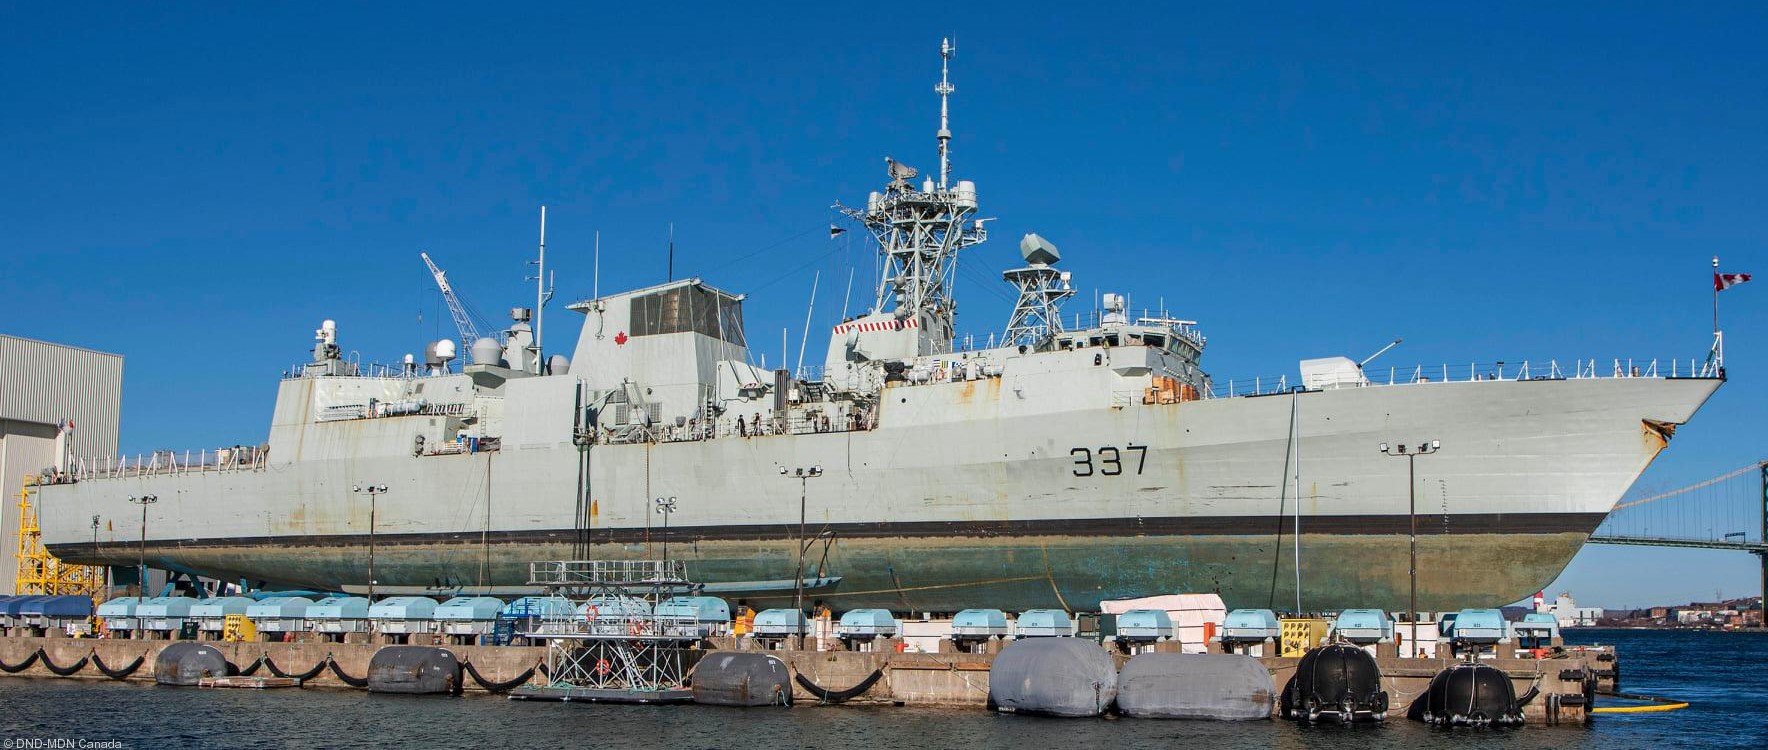 ffh-337 hmcs fredericton halifax class helicopter patrol frigate ncsm royal canadian navy 11